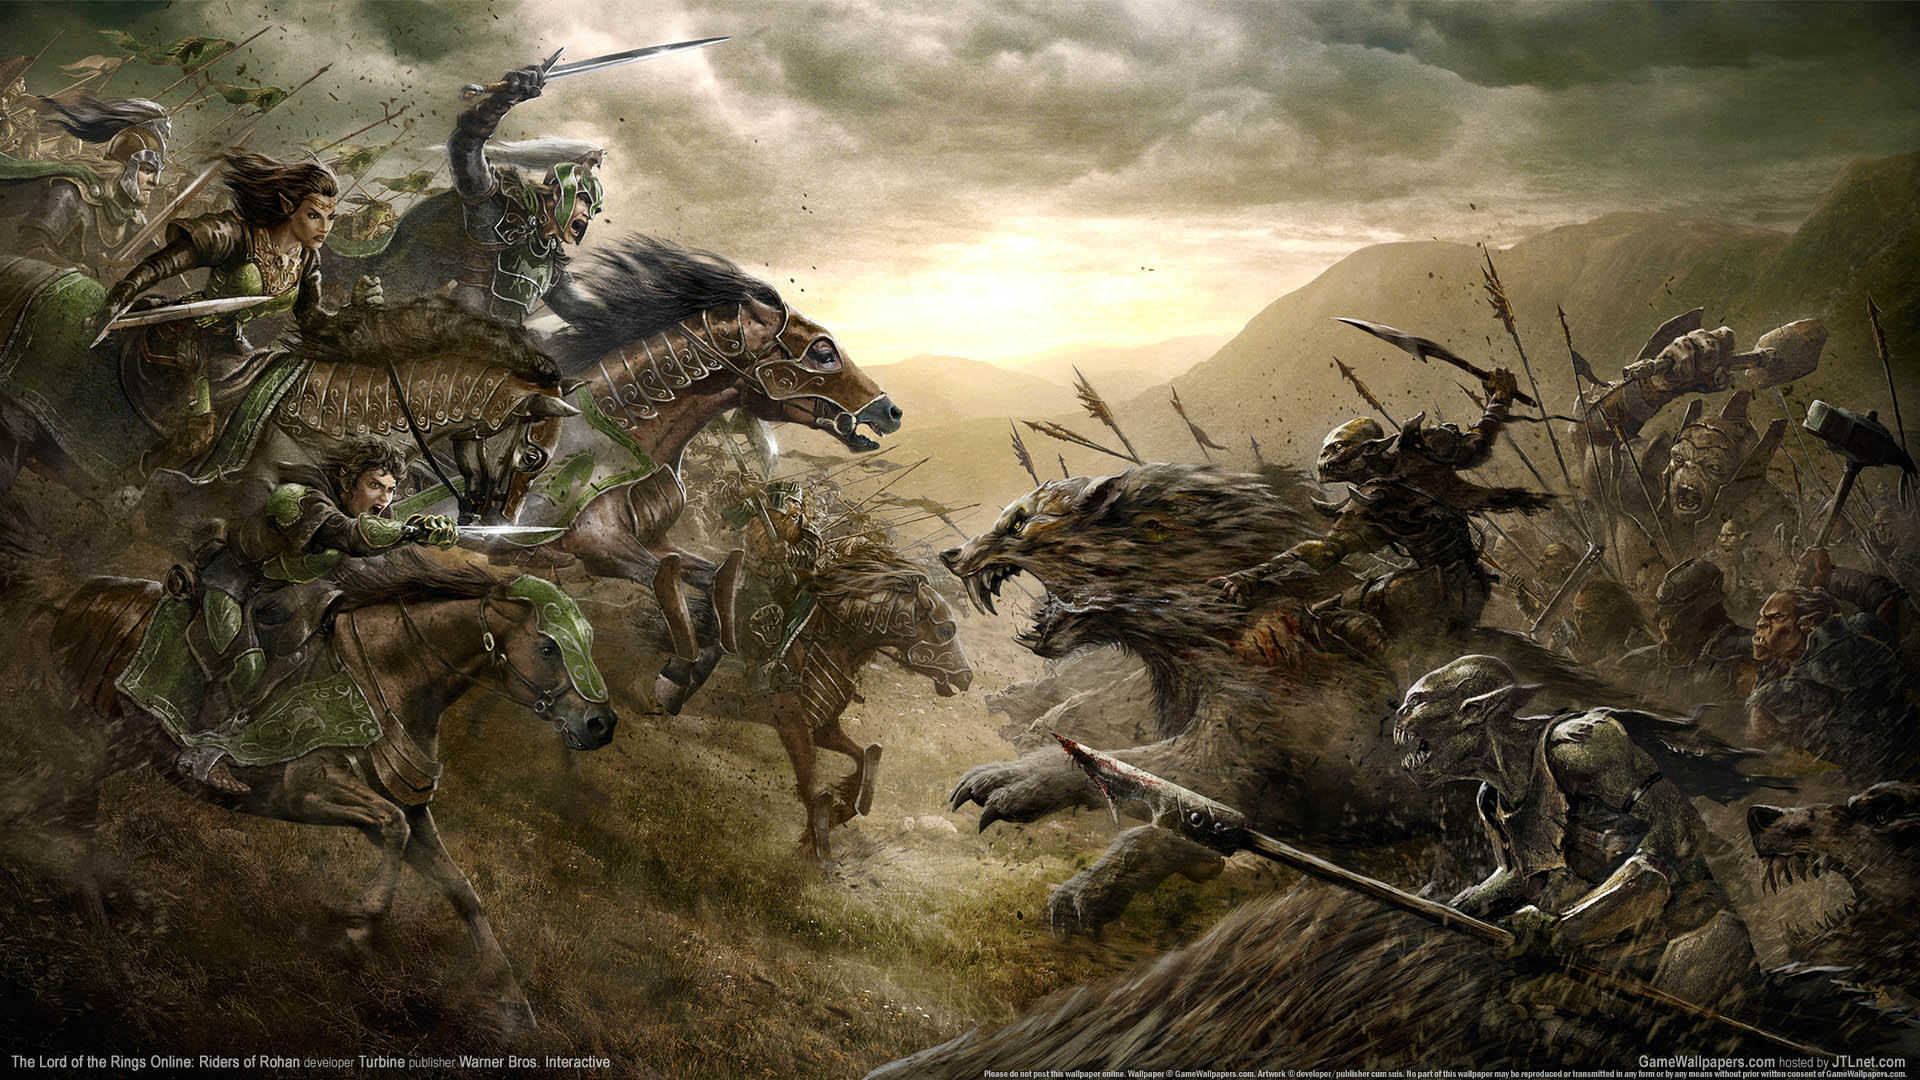 The Lord of the Rings Online: Riders of Rohan fond d'cran 01 1920x1080